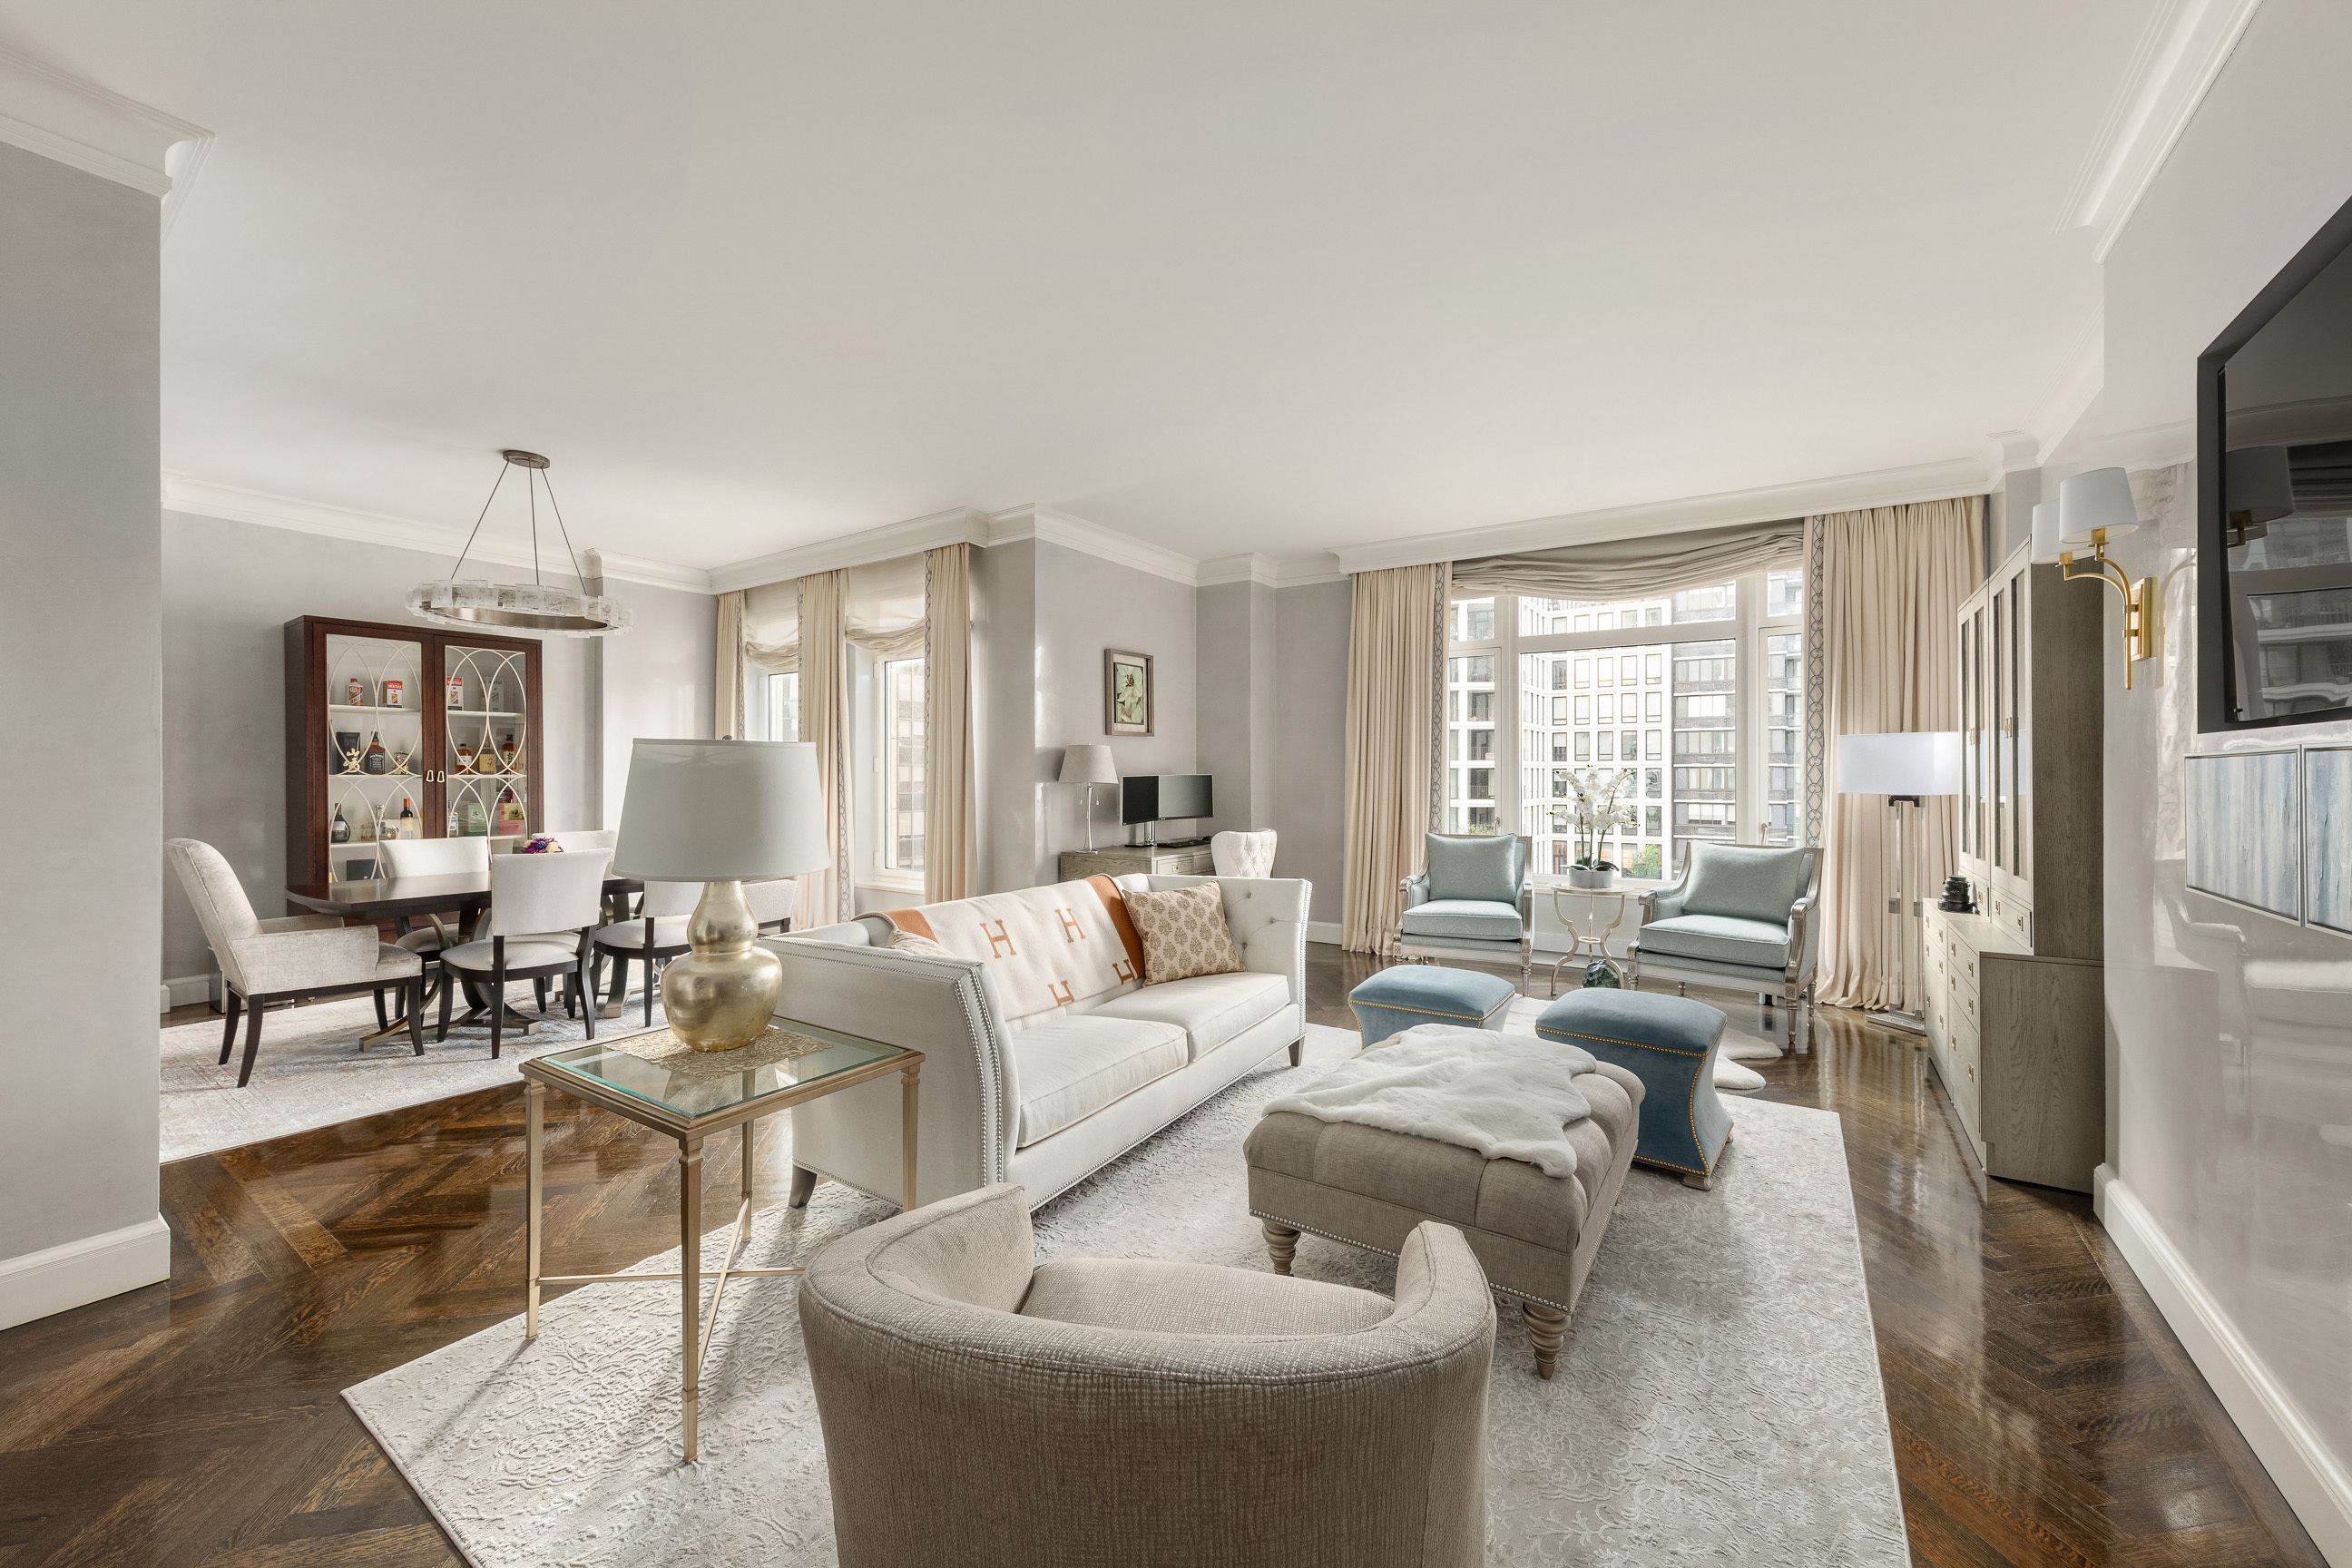 15 Central Park 12L, Lincoln Square, Upper West Side, NYC - 2 Bedrooms  
2 Bathrooms  
5 Rooms - 